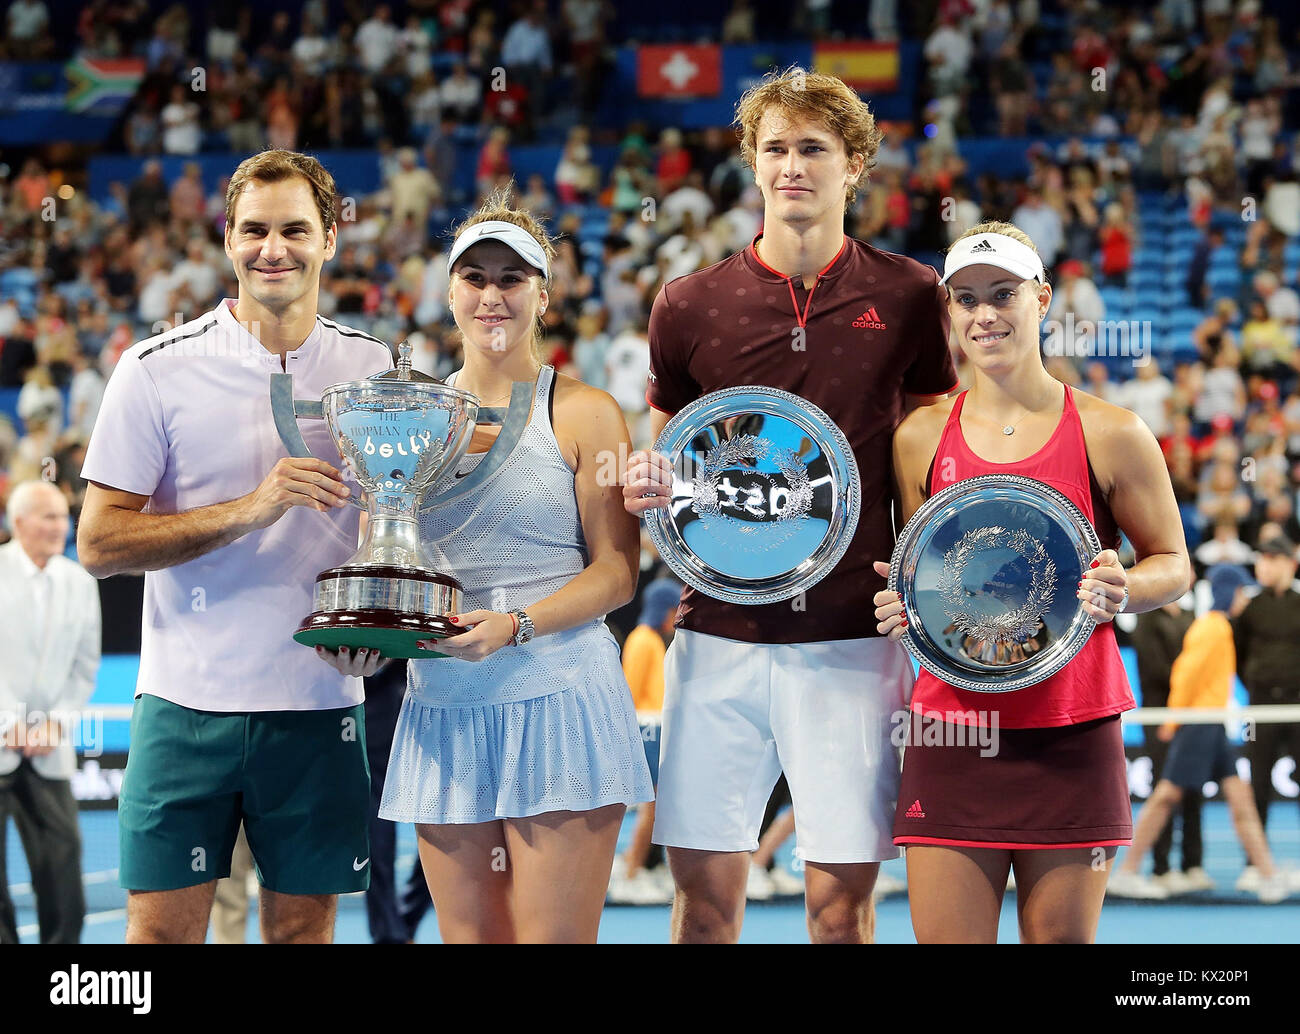 Perth, Australia. 6th Jan, 2018. (L-R) Roger Federer, Belinda Bencic of  Switzerland, Alexander Zverev and Angelique Kerber of Germany pose during  the awarding ceremony for the Hopman Cup mixed teams tennis tournament